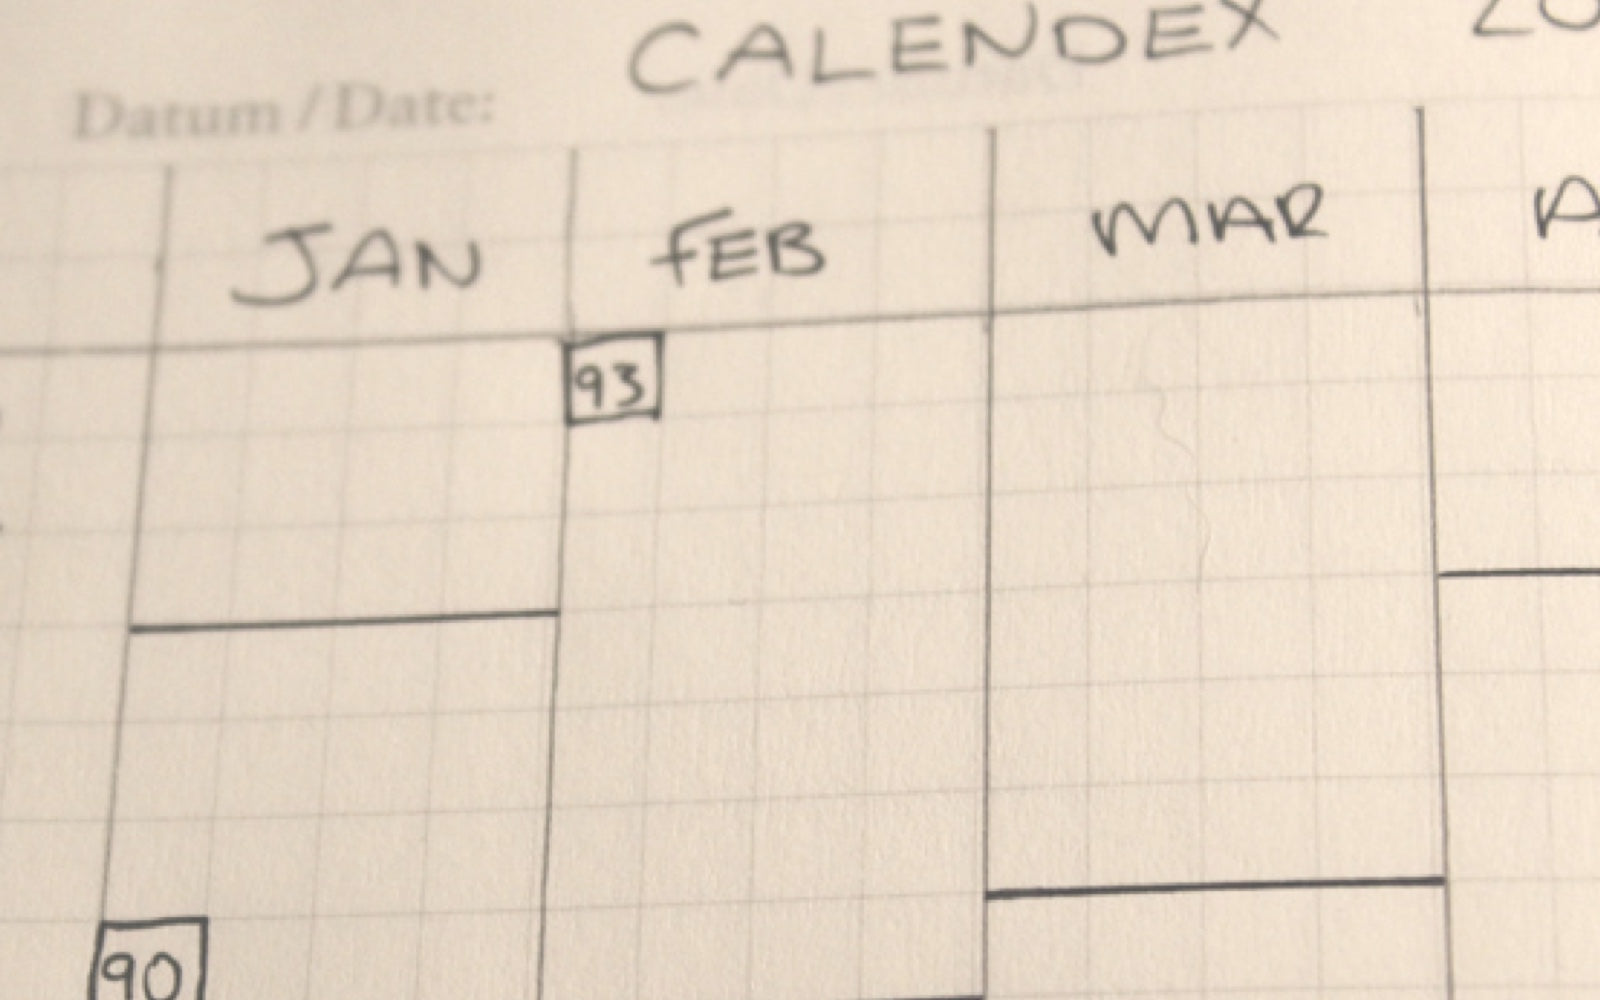 An Update on the Bullet Journal Calendex by Eddy Hope